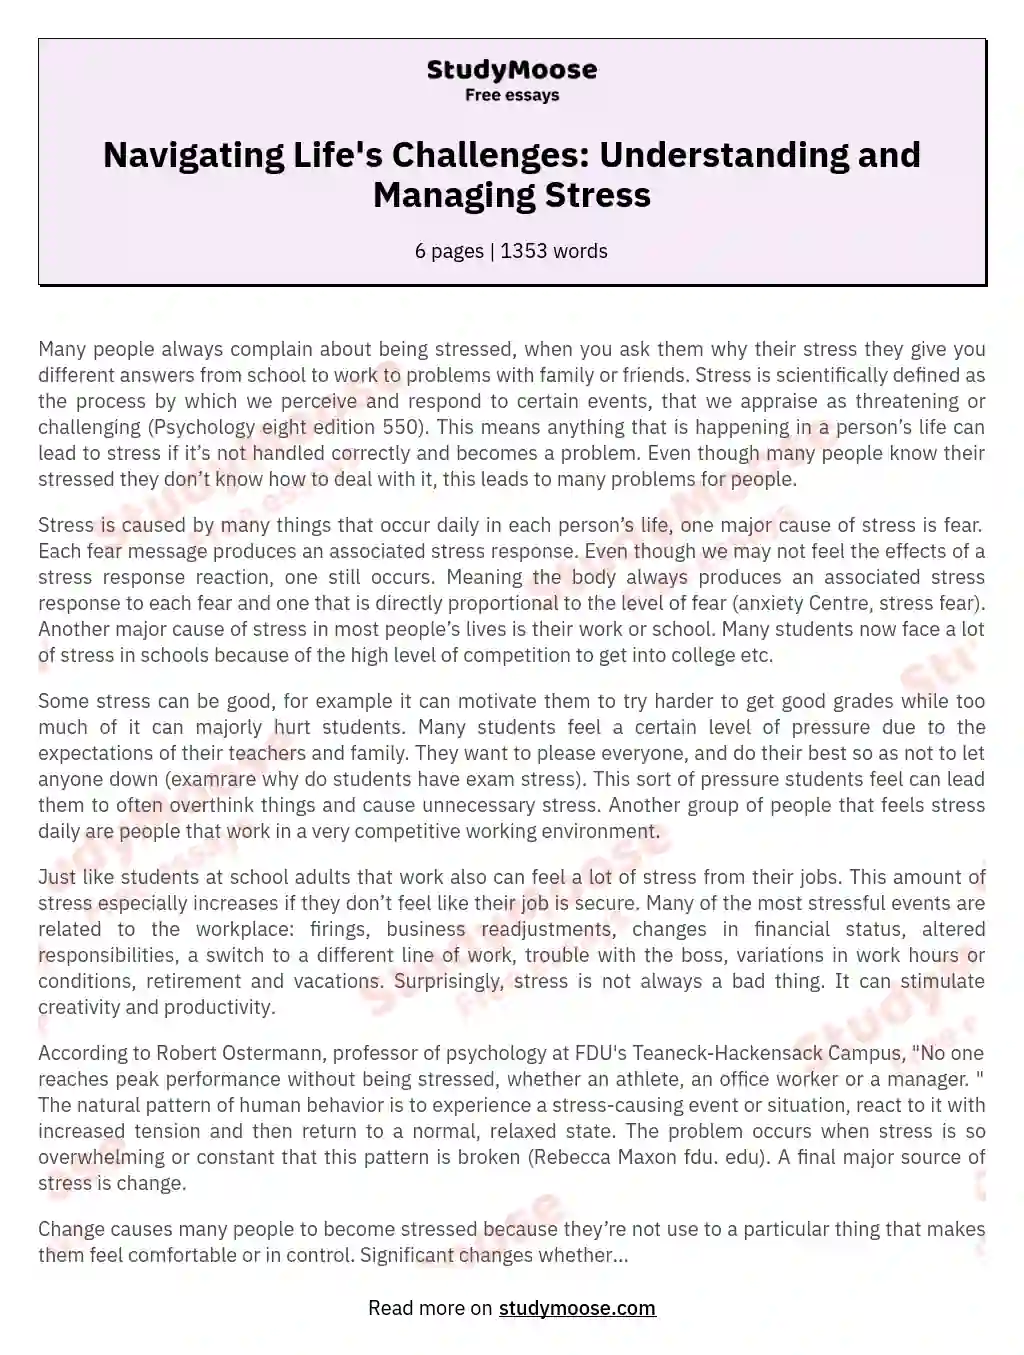 Navigating Life's Challenges: Understanding and Managing Stress essay